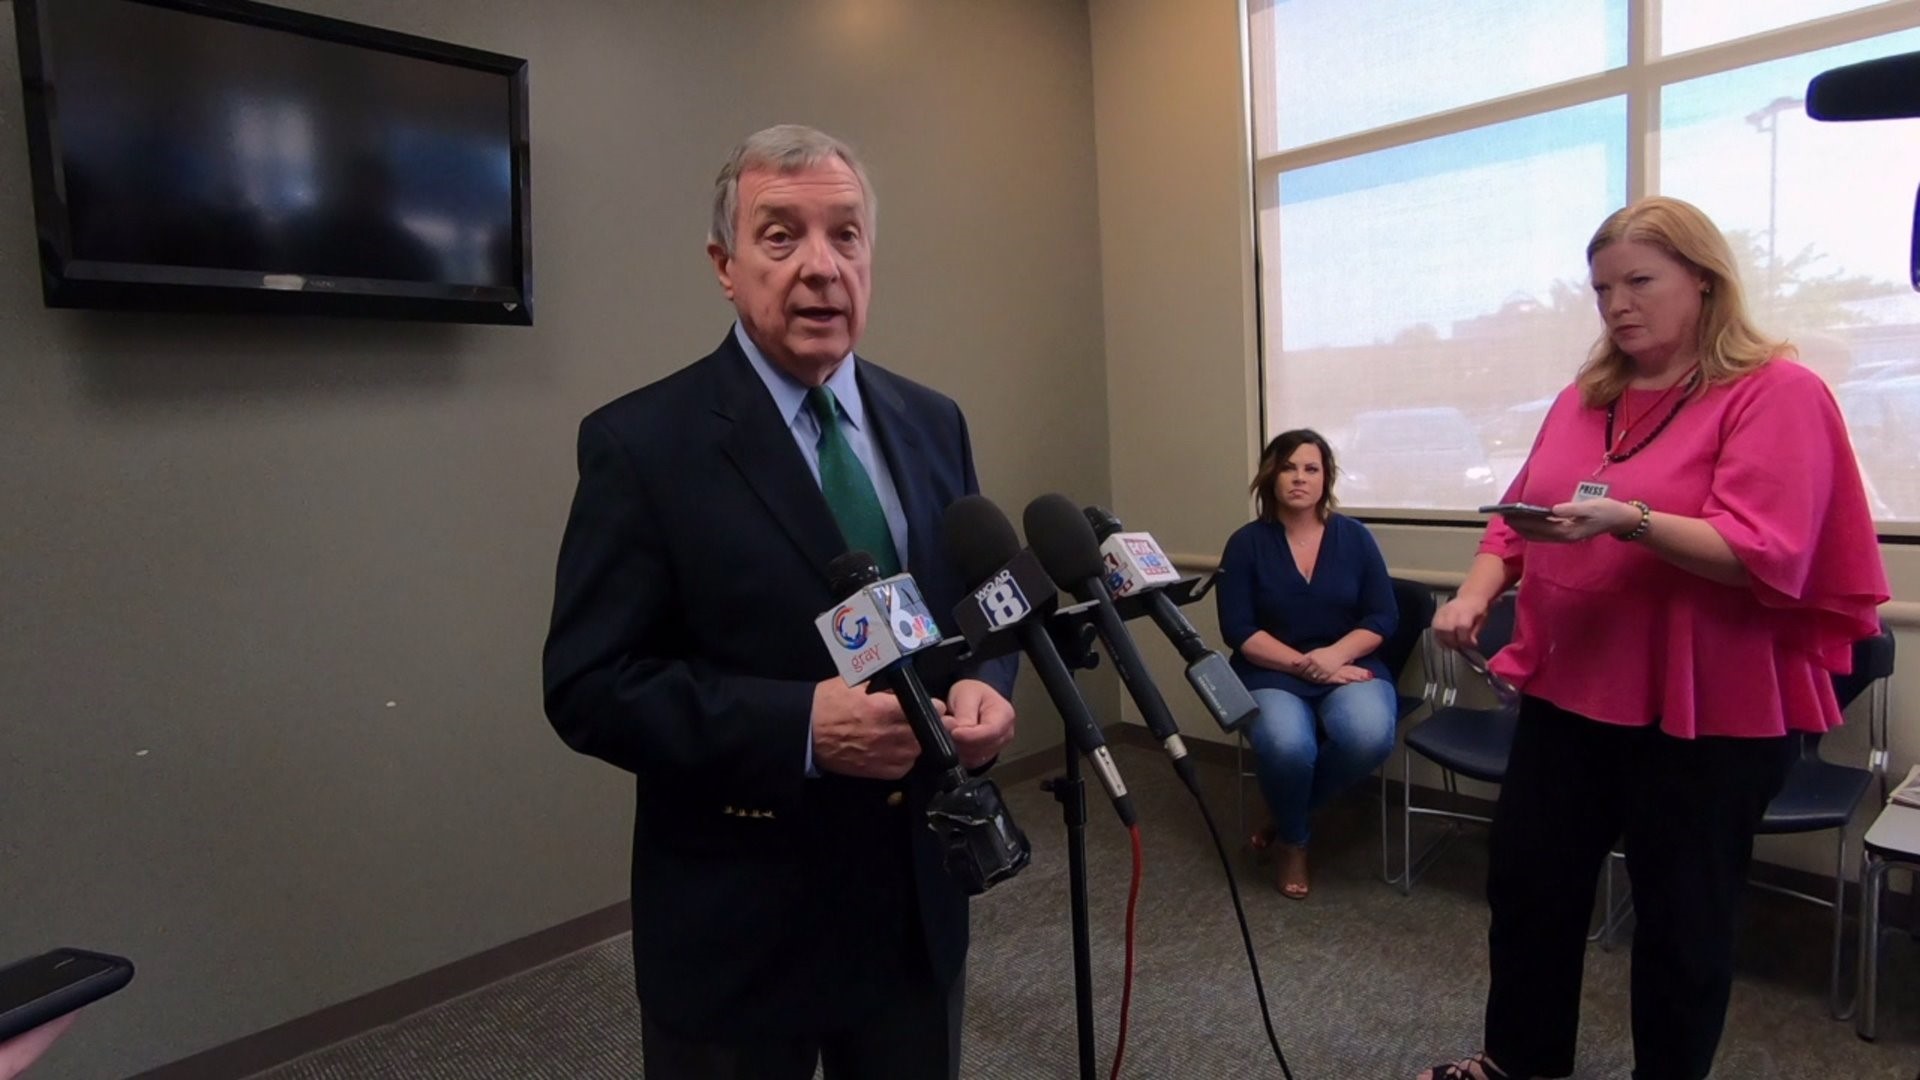 Senator Durbin speaks out on what action needs to take place following two mass shootings